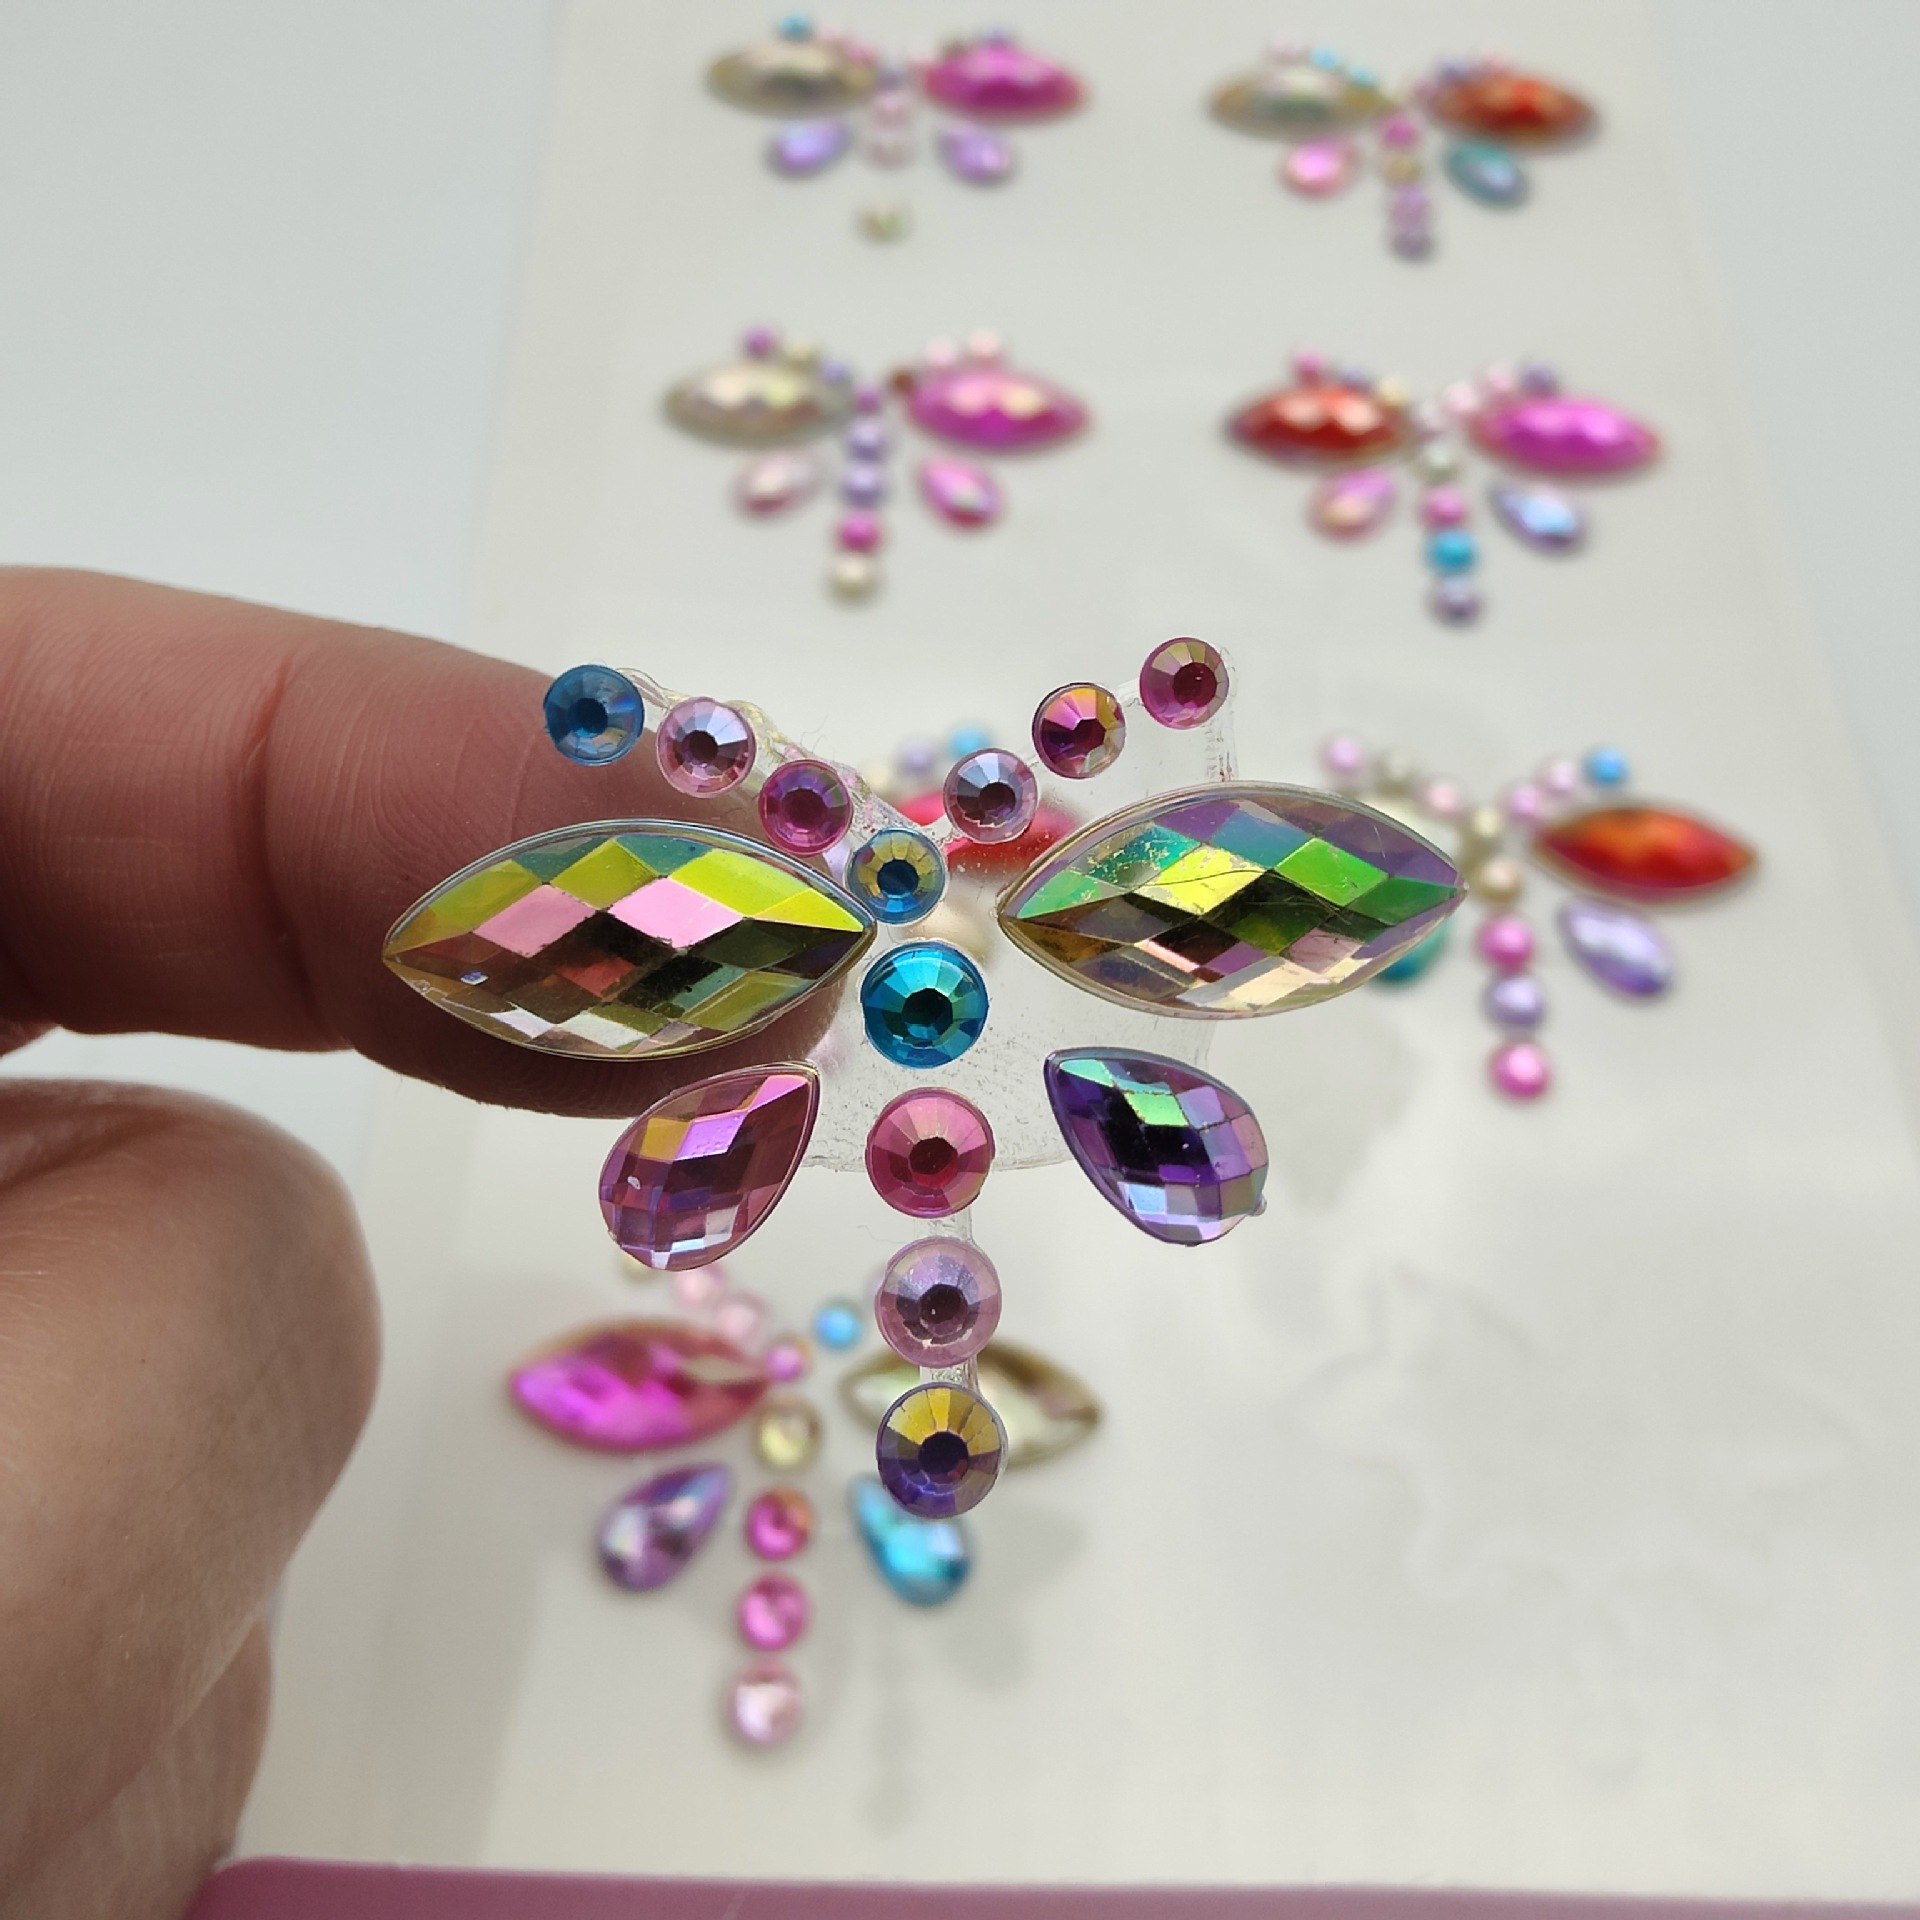 AB Colorful Crystals Sunny Butterfly Diamond Sticker Children's Colorful Gems Acrylic Crystal Stickers Toy Stickers Wholesale